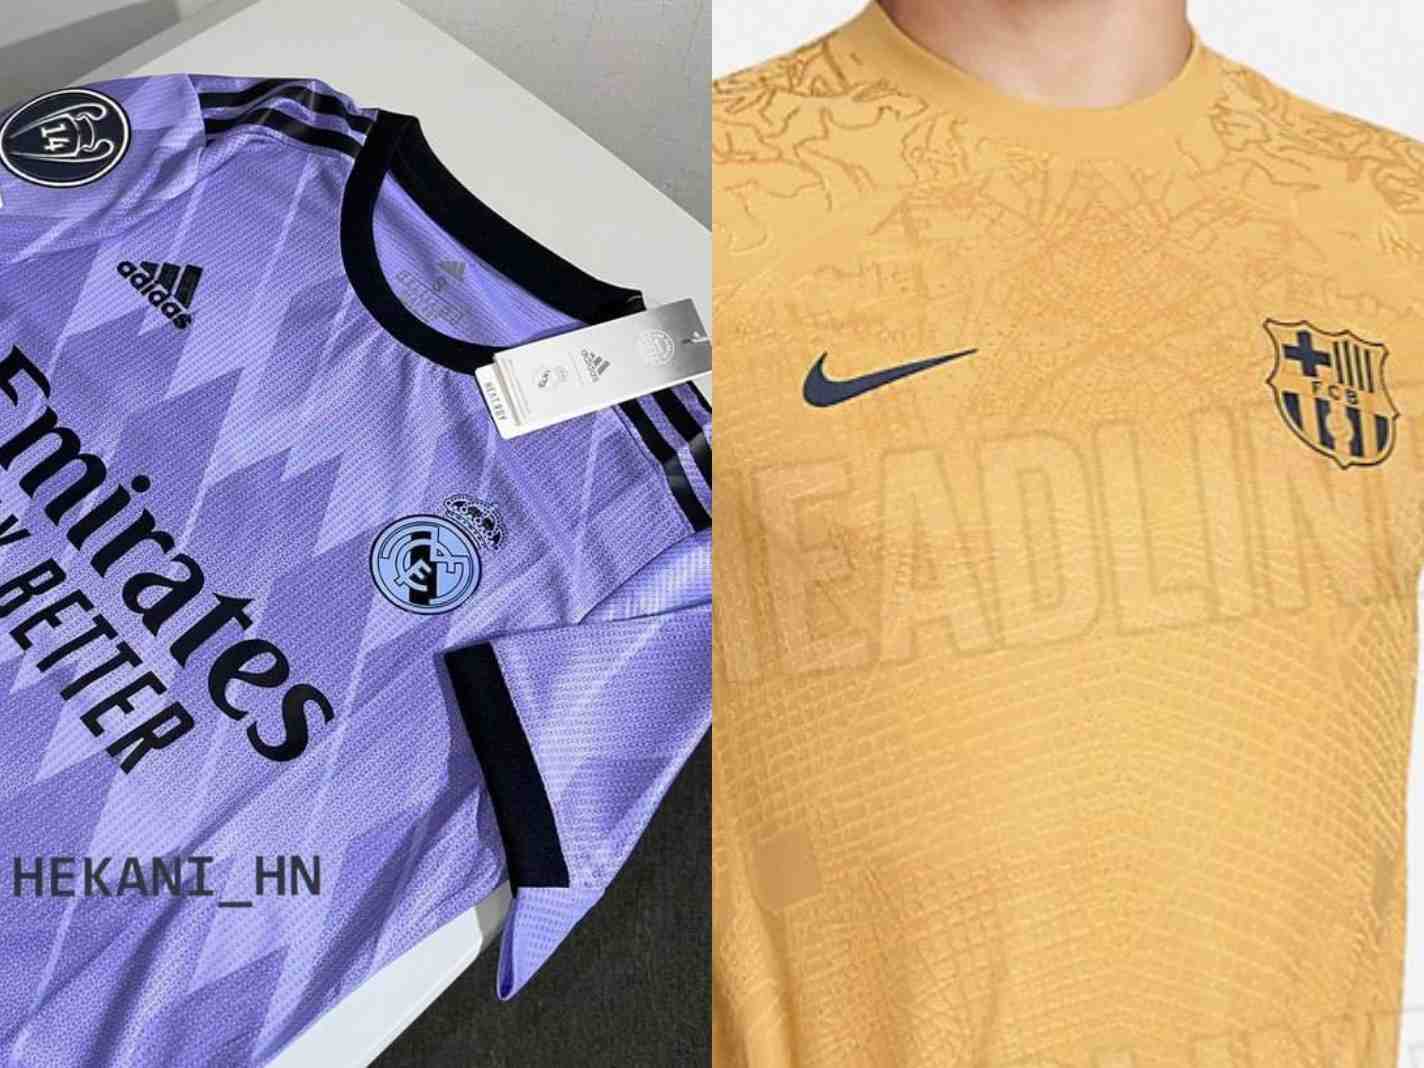 Leaked images of Real Madrid and Barcelona away kits for 2223 season.